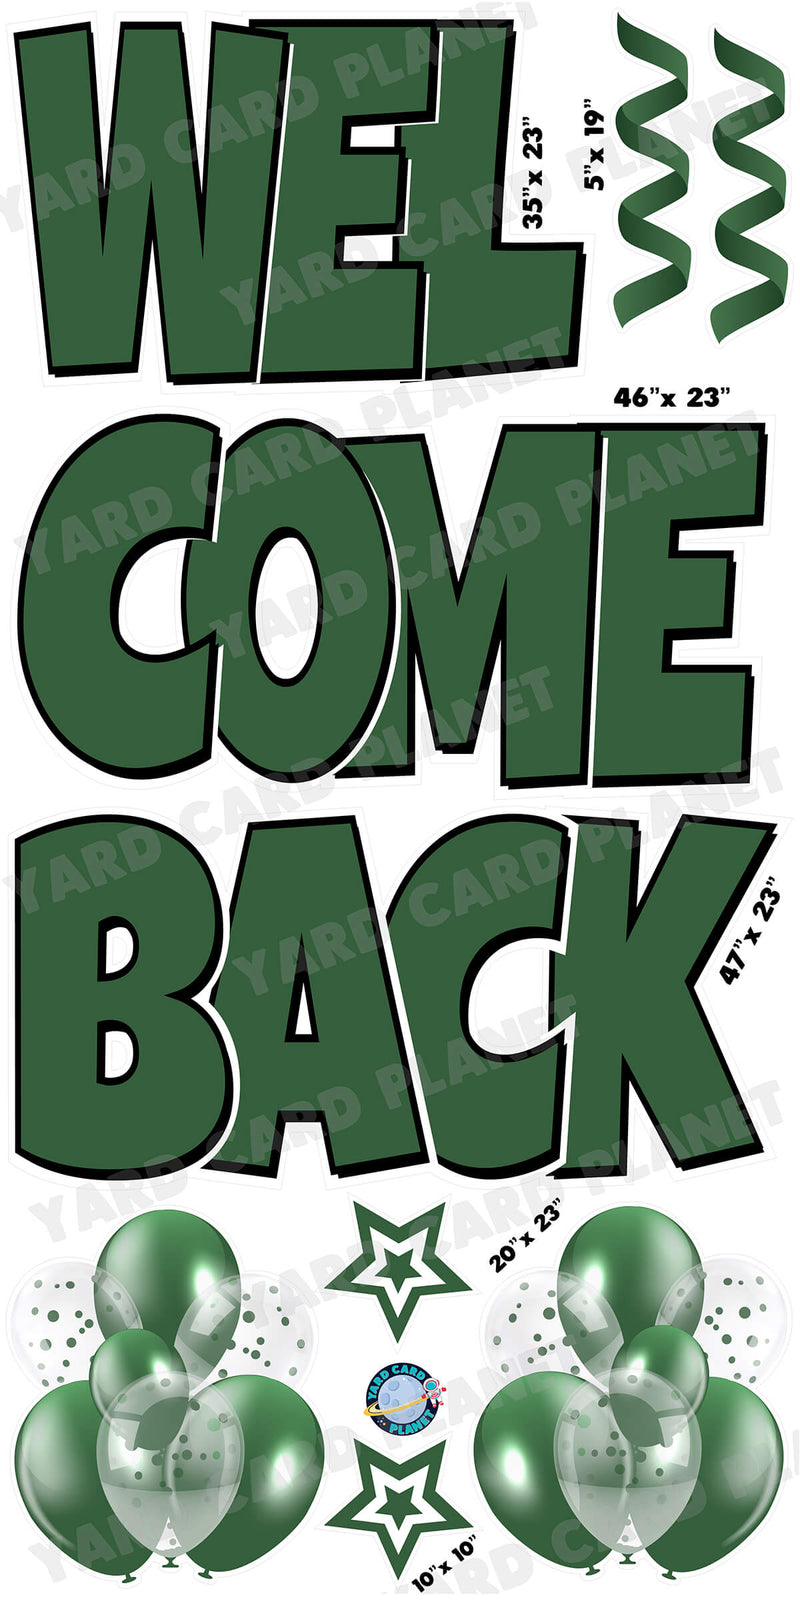 Large 23" Welcome Back Yard Card EZ Quick Sets in Luckiest Guy Font and Flair in Solid Colors (Available in Multiple Colors)